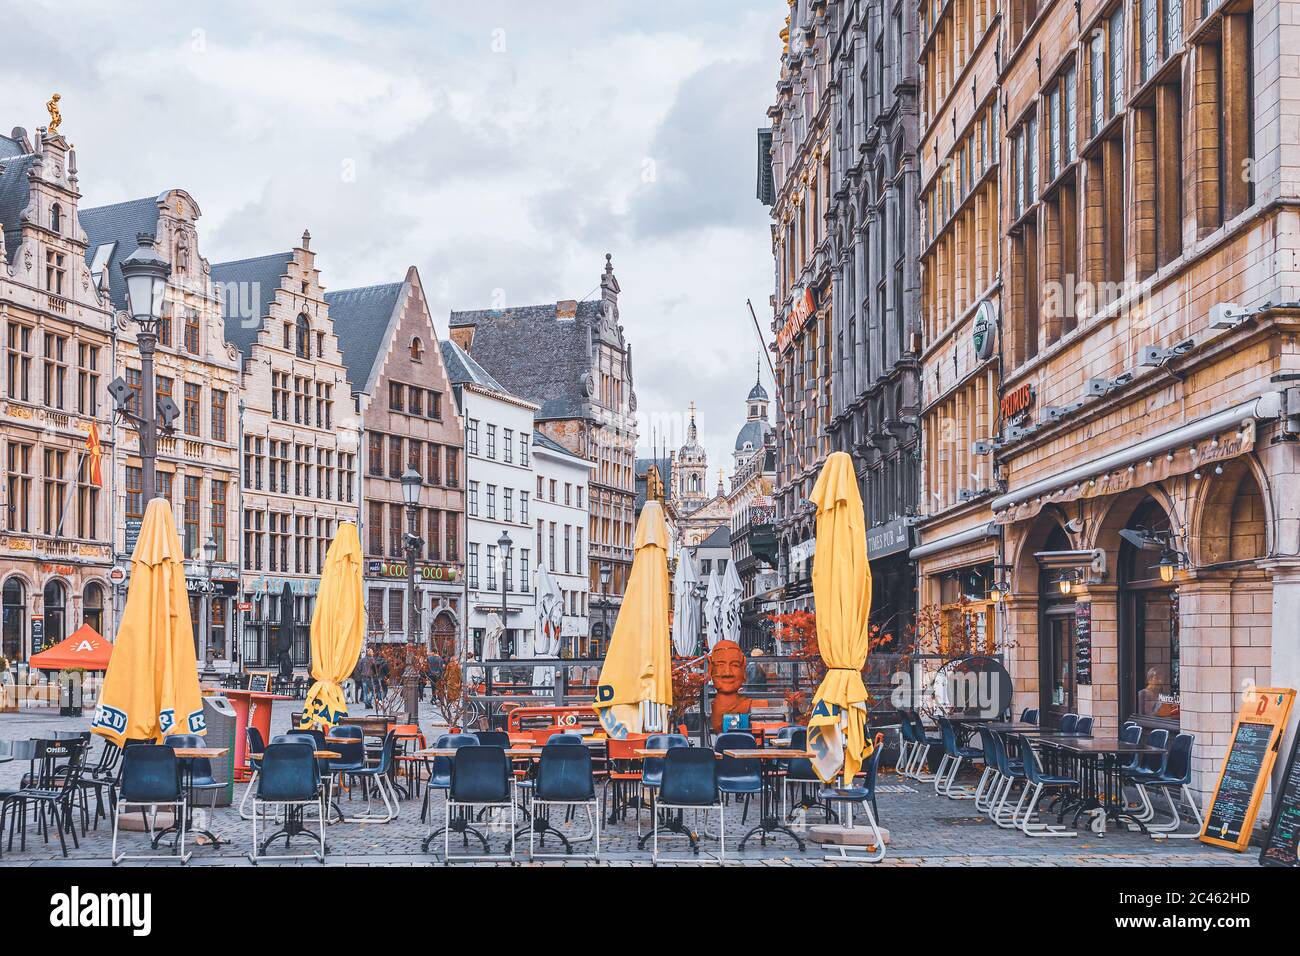 Market place in Antwerp on a cloudy autumn day Stock Photo